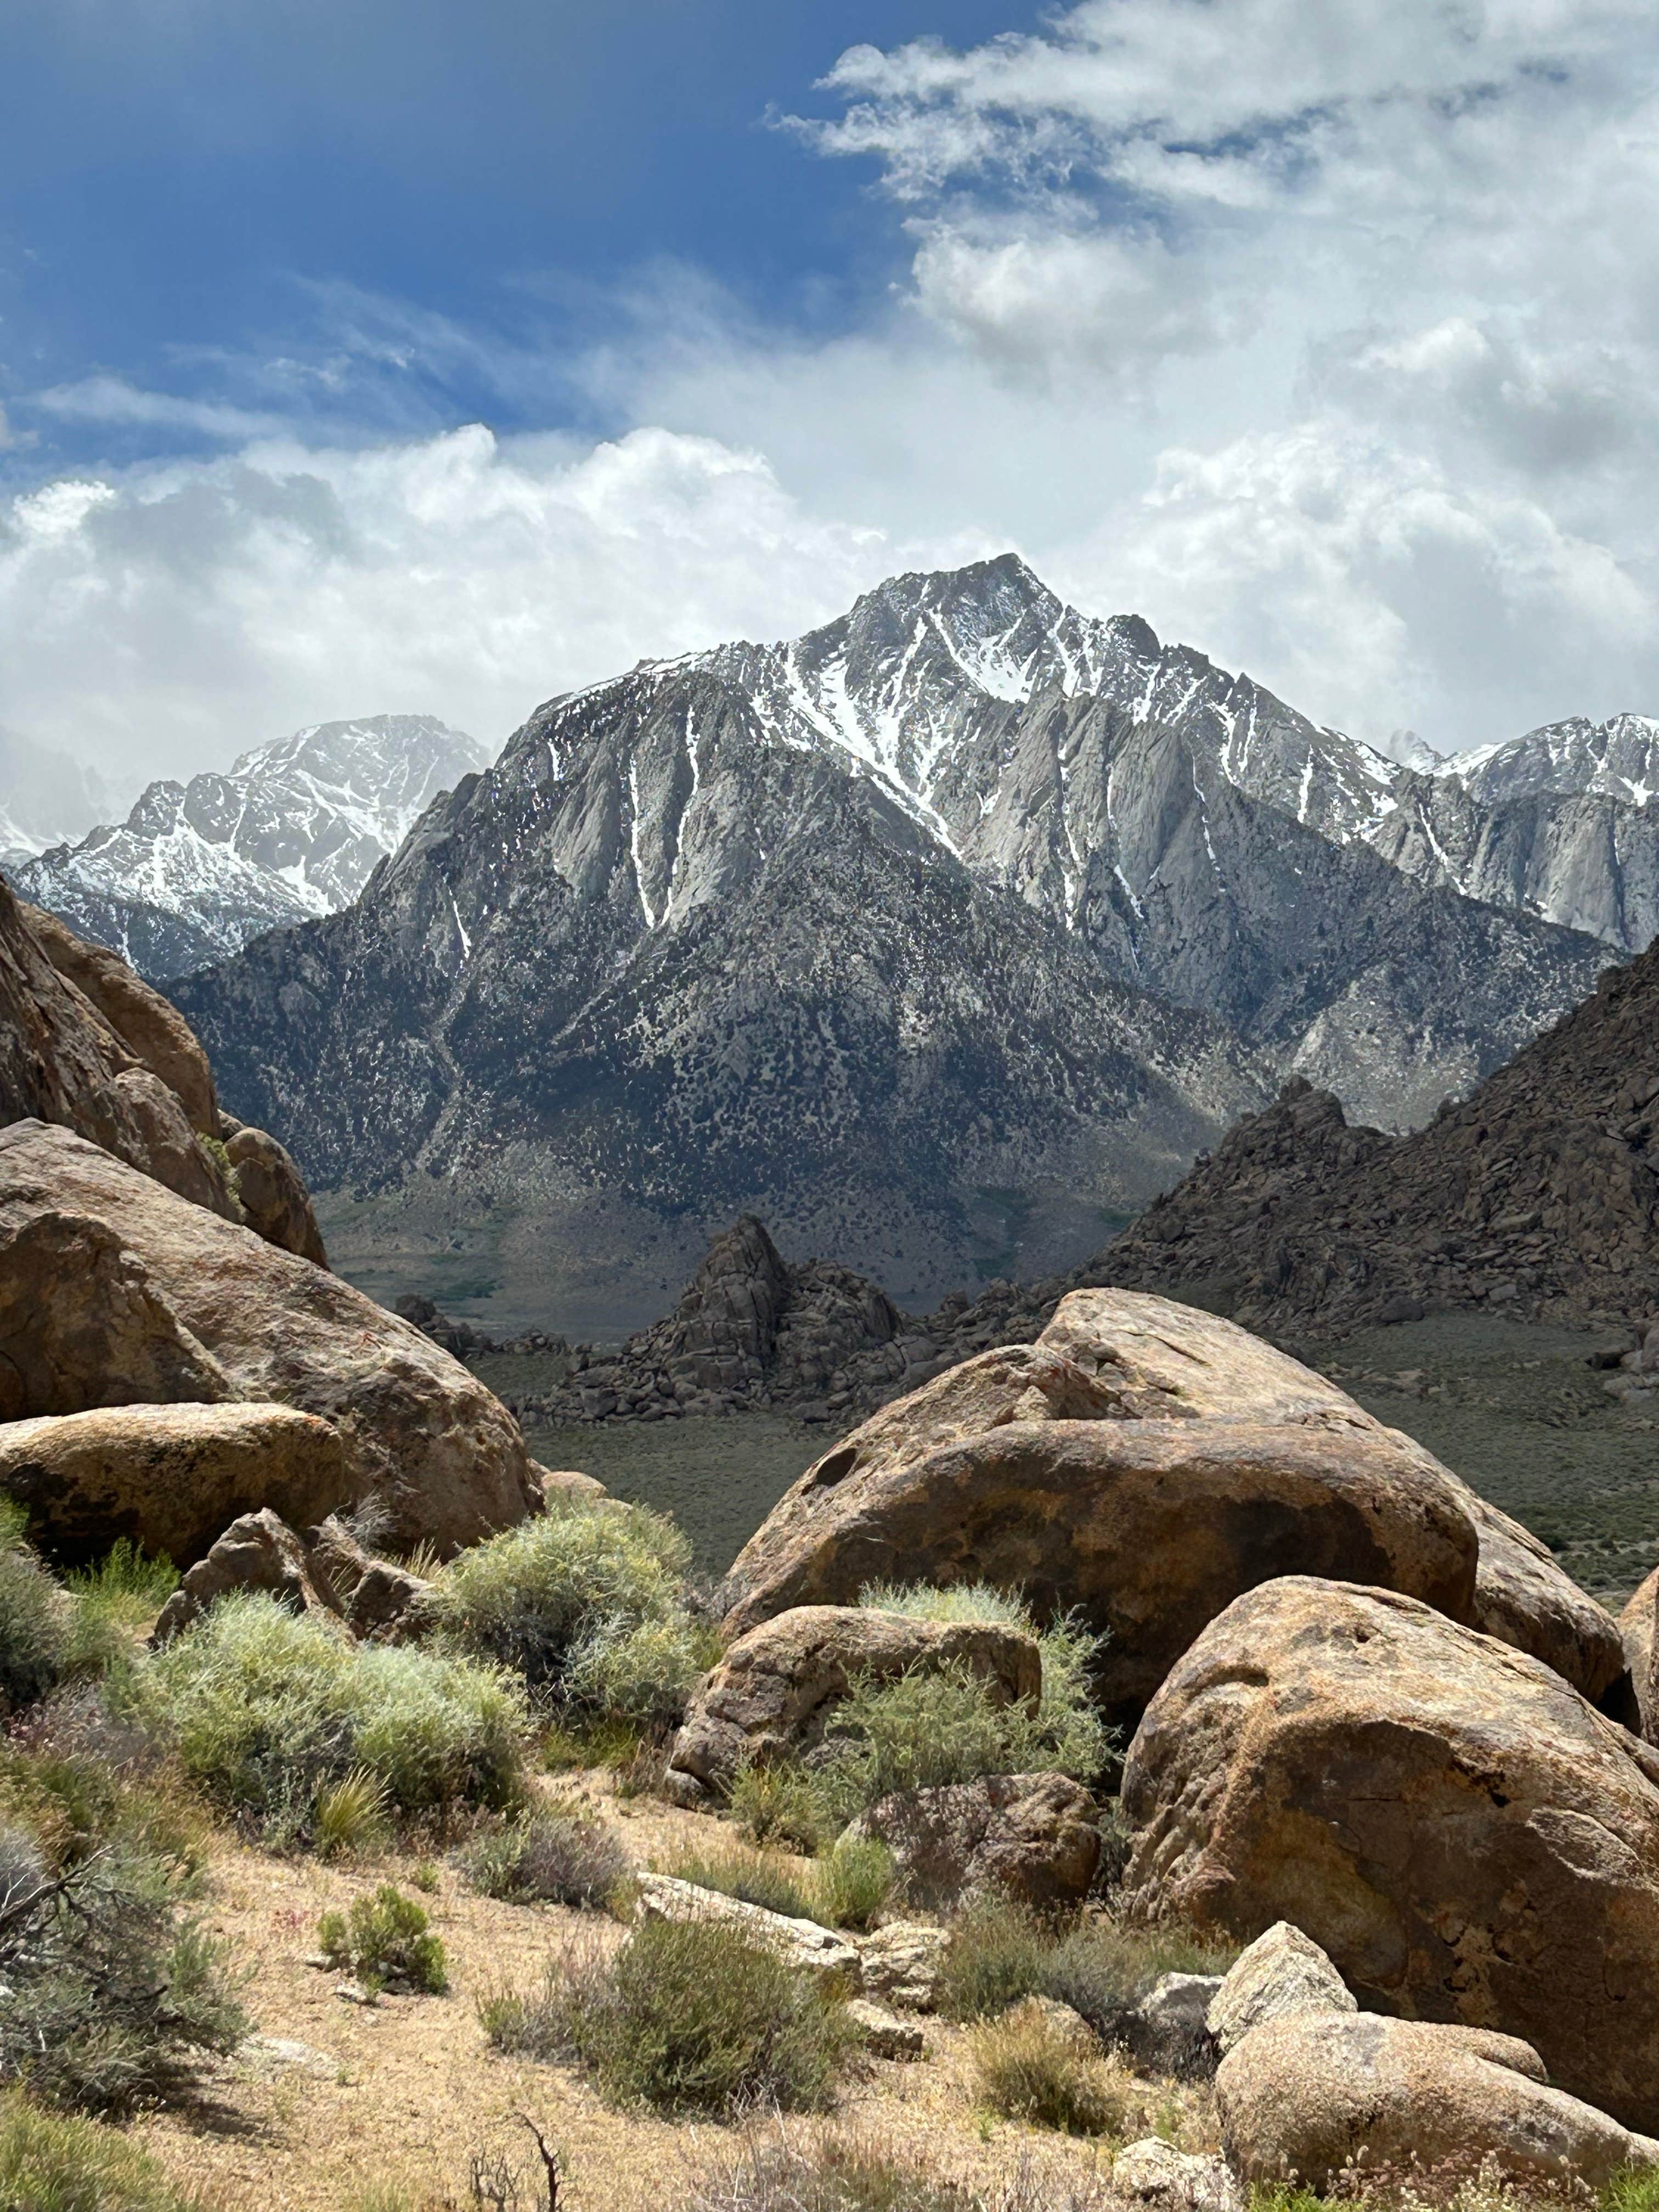 Camper submitted image from Alabama Hills on Movie Flat Road - 2